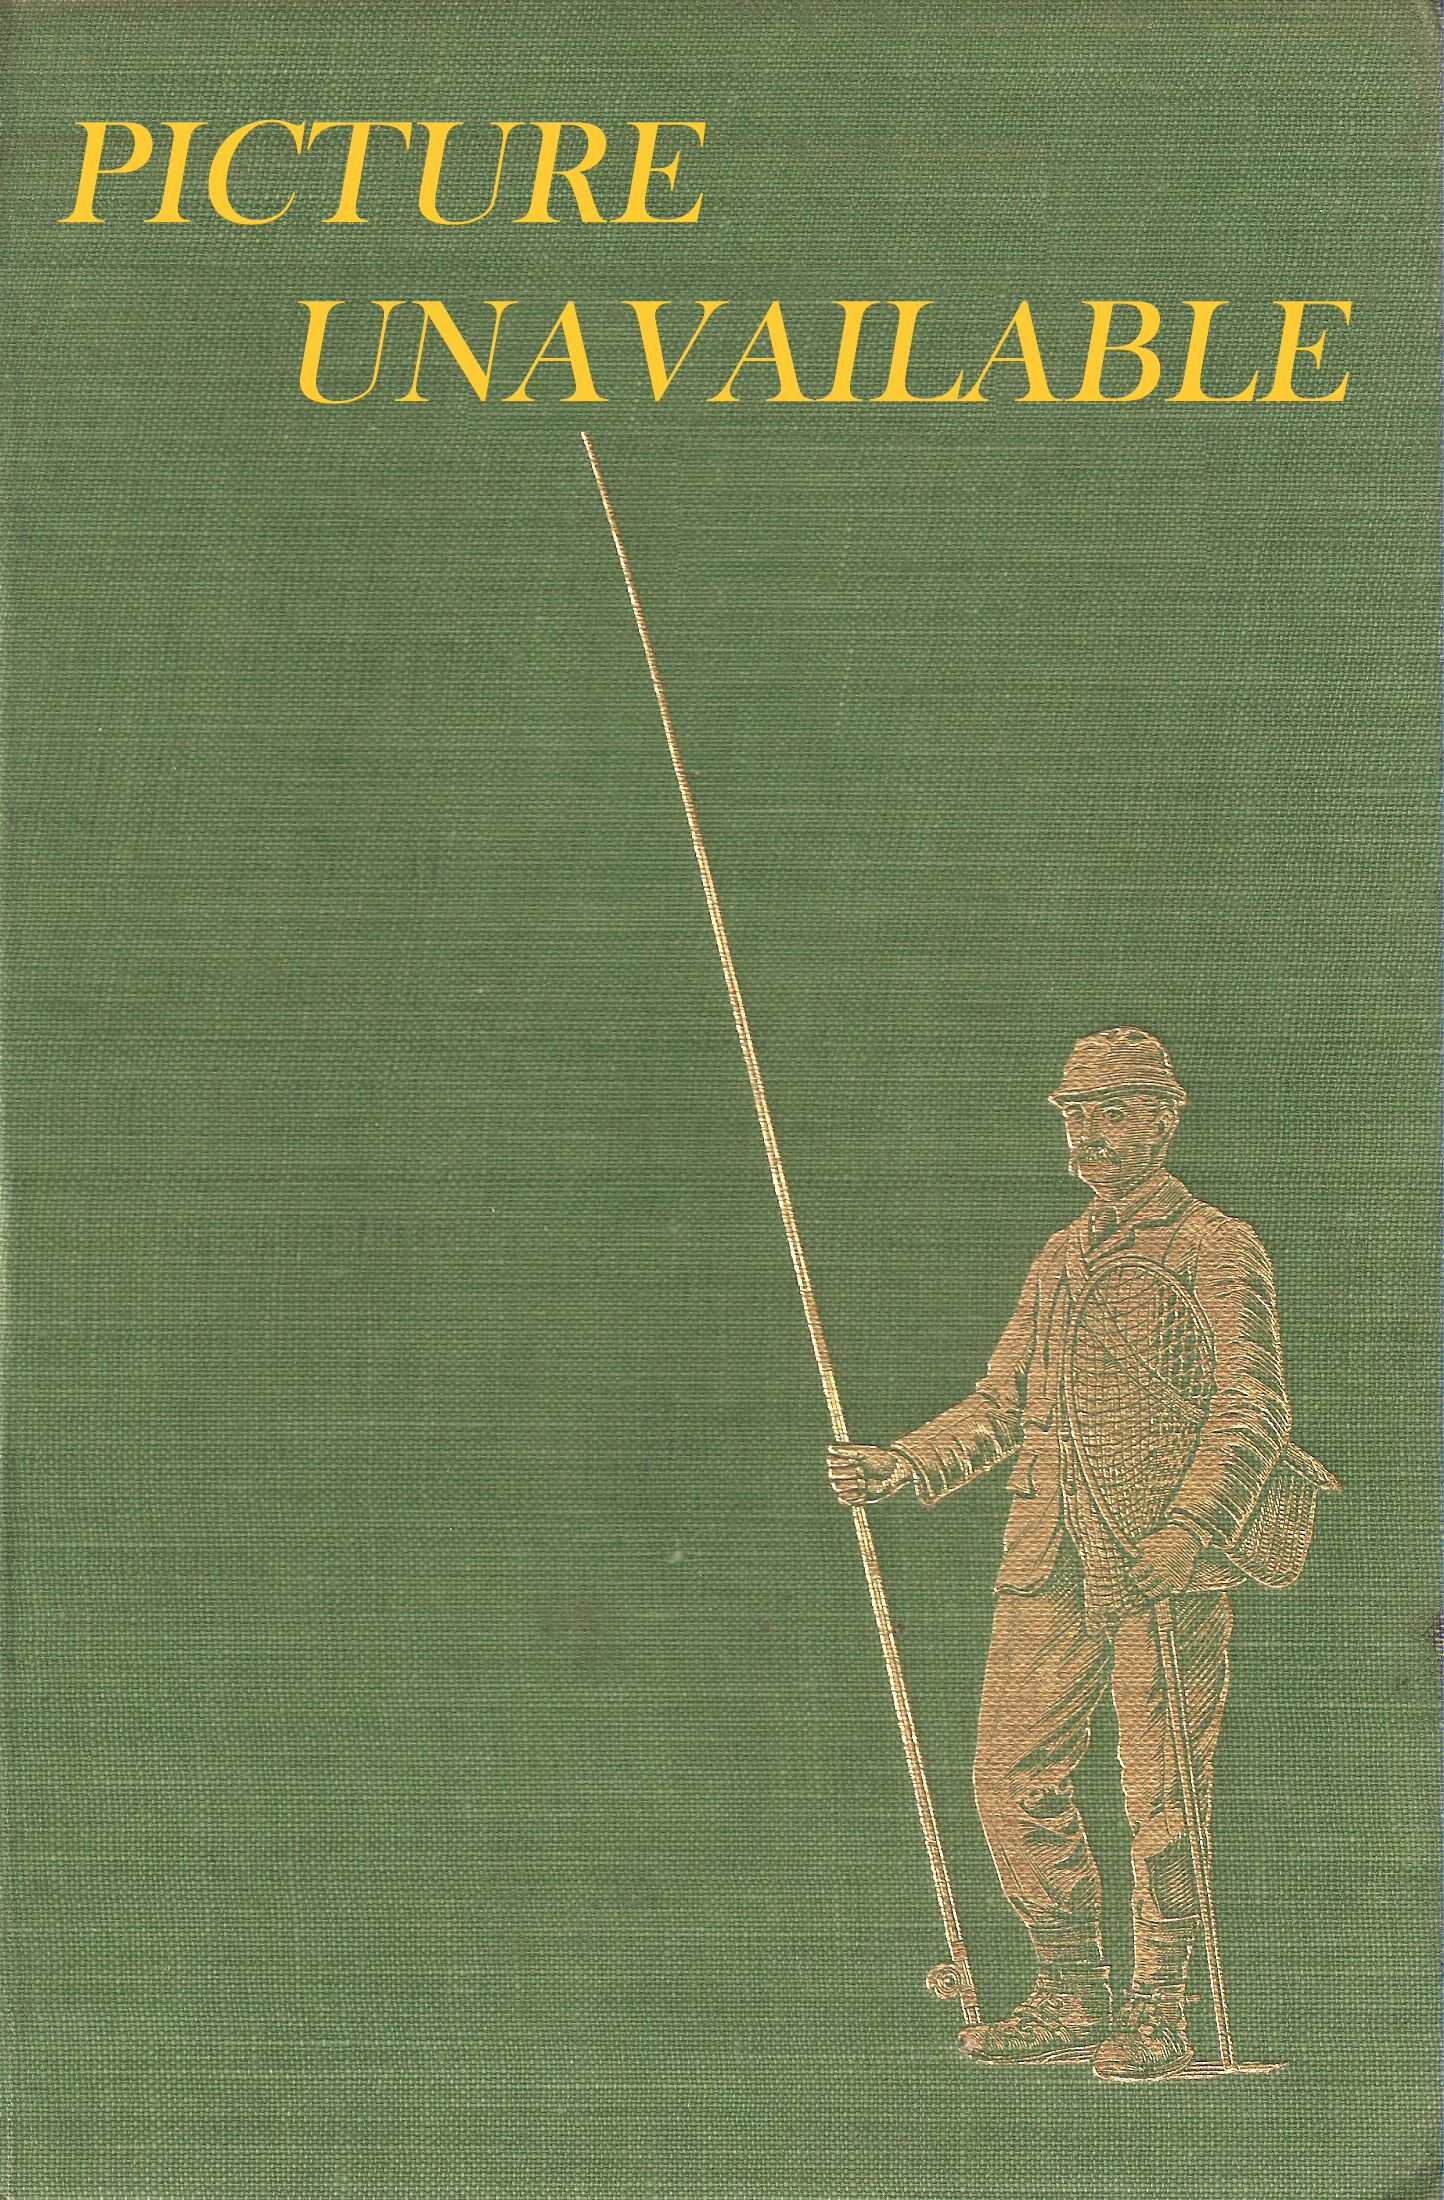 RIFLE AND GUN: FOR PRACTICE, COMPETITION AND SPORT. By L.B. Escritt.